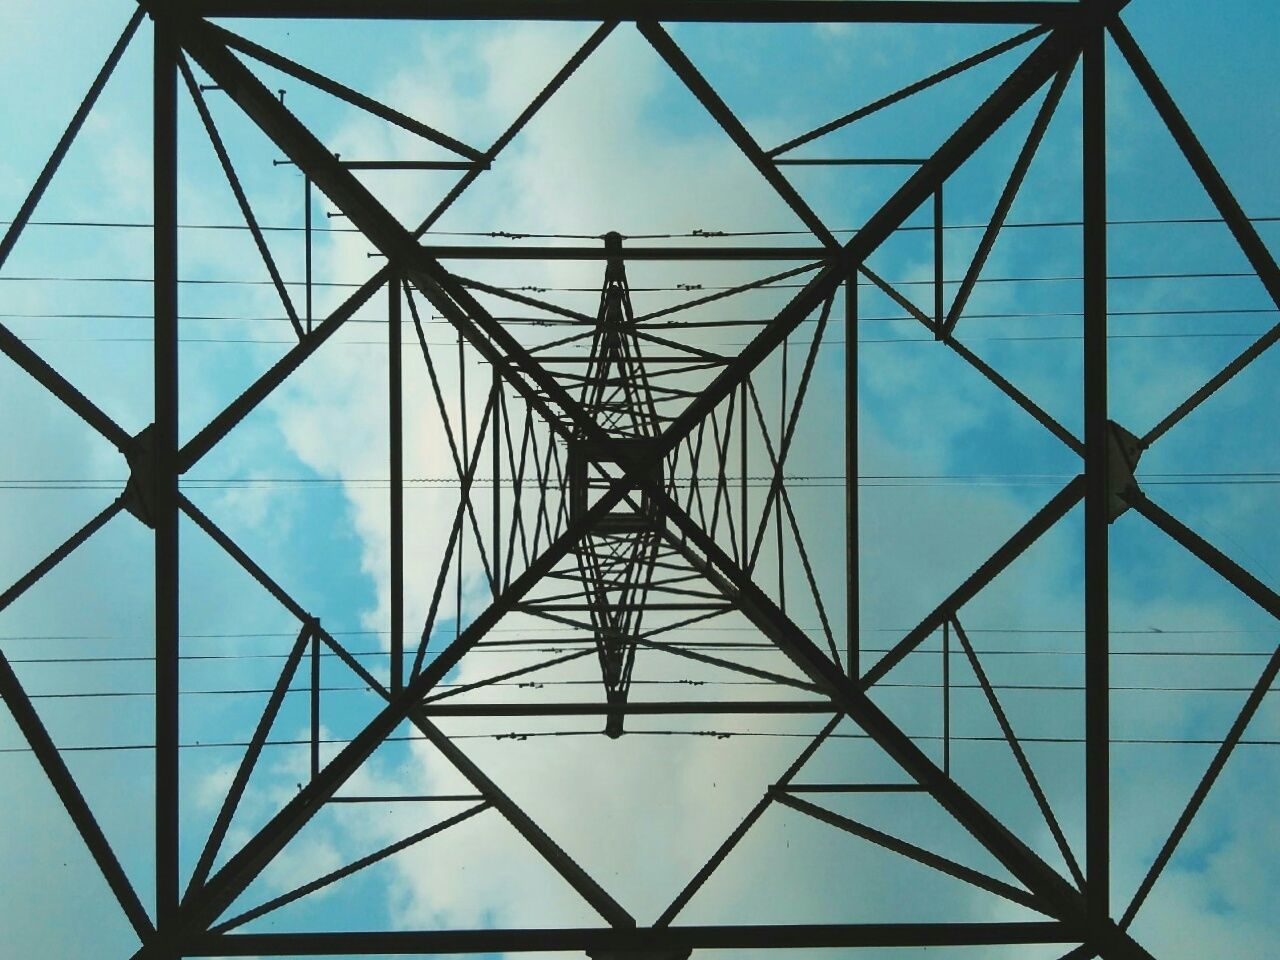 LOW ANGLE VIEW OF ELECTRICITY PYLONS AGAINST BLUE SKY